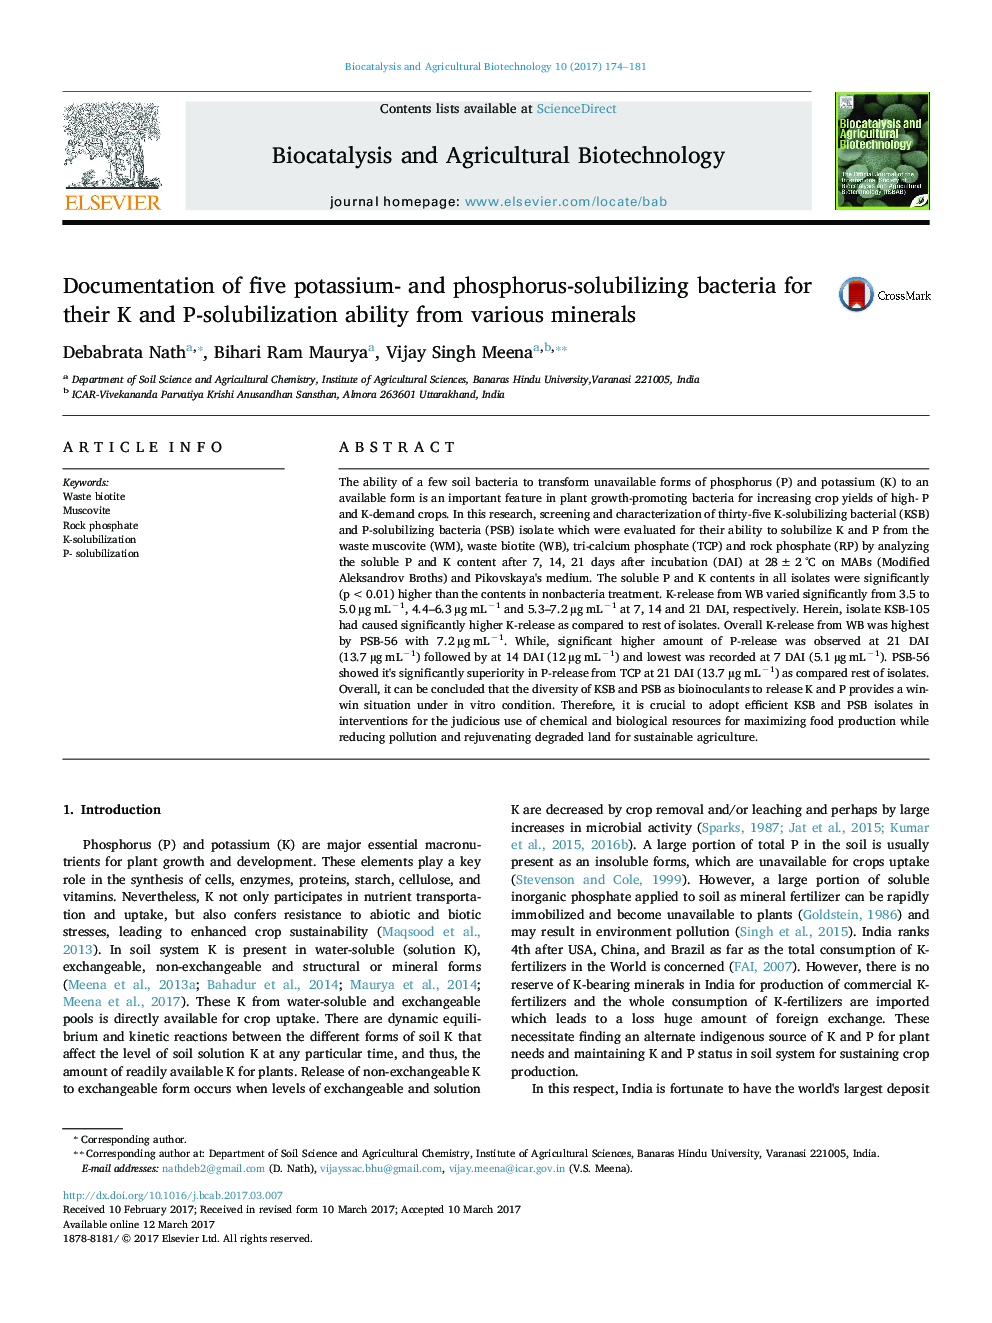 Documentation of five potassium- and phosphorus-solubilizing bacteria for their K and P-solubilization ability from various minerals